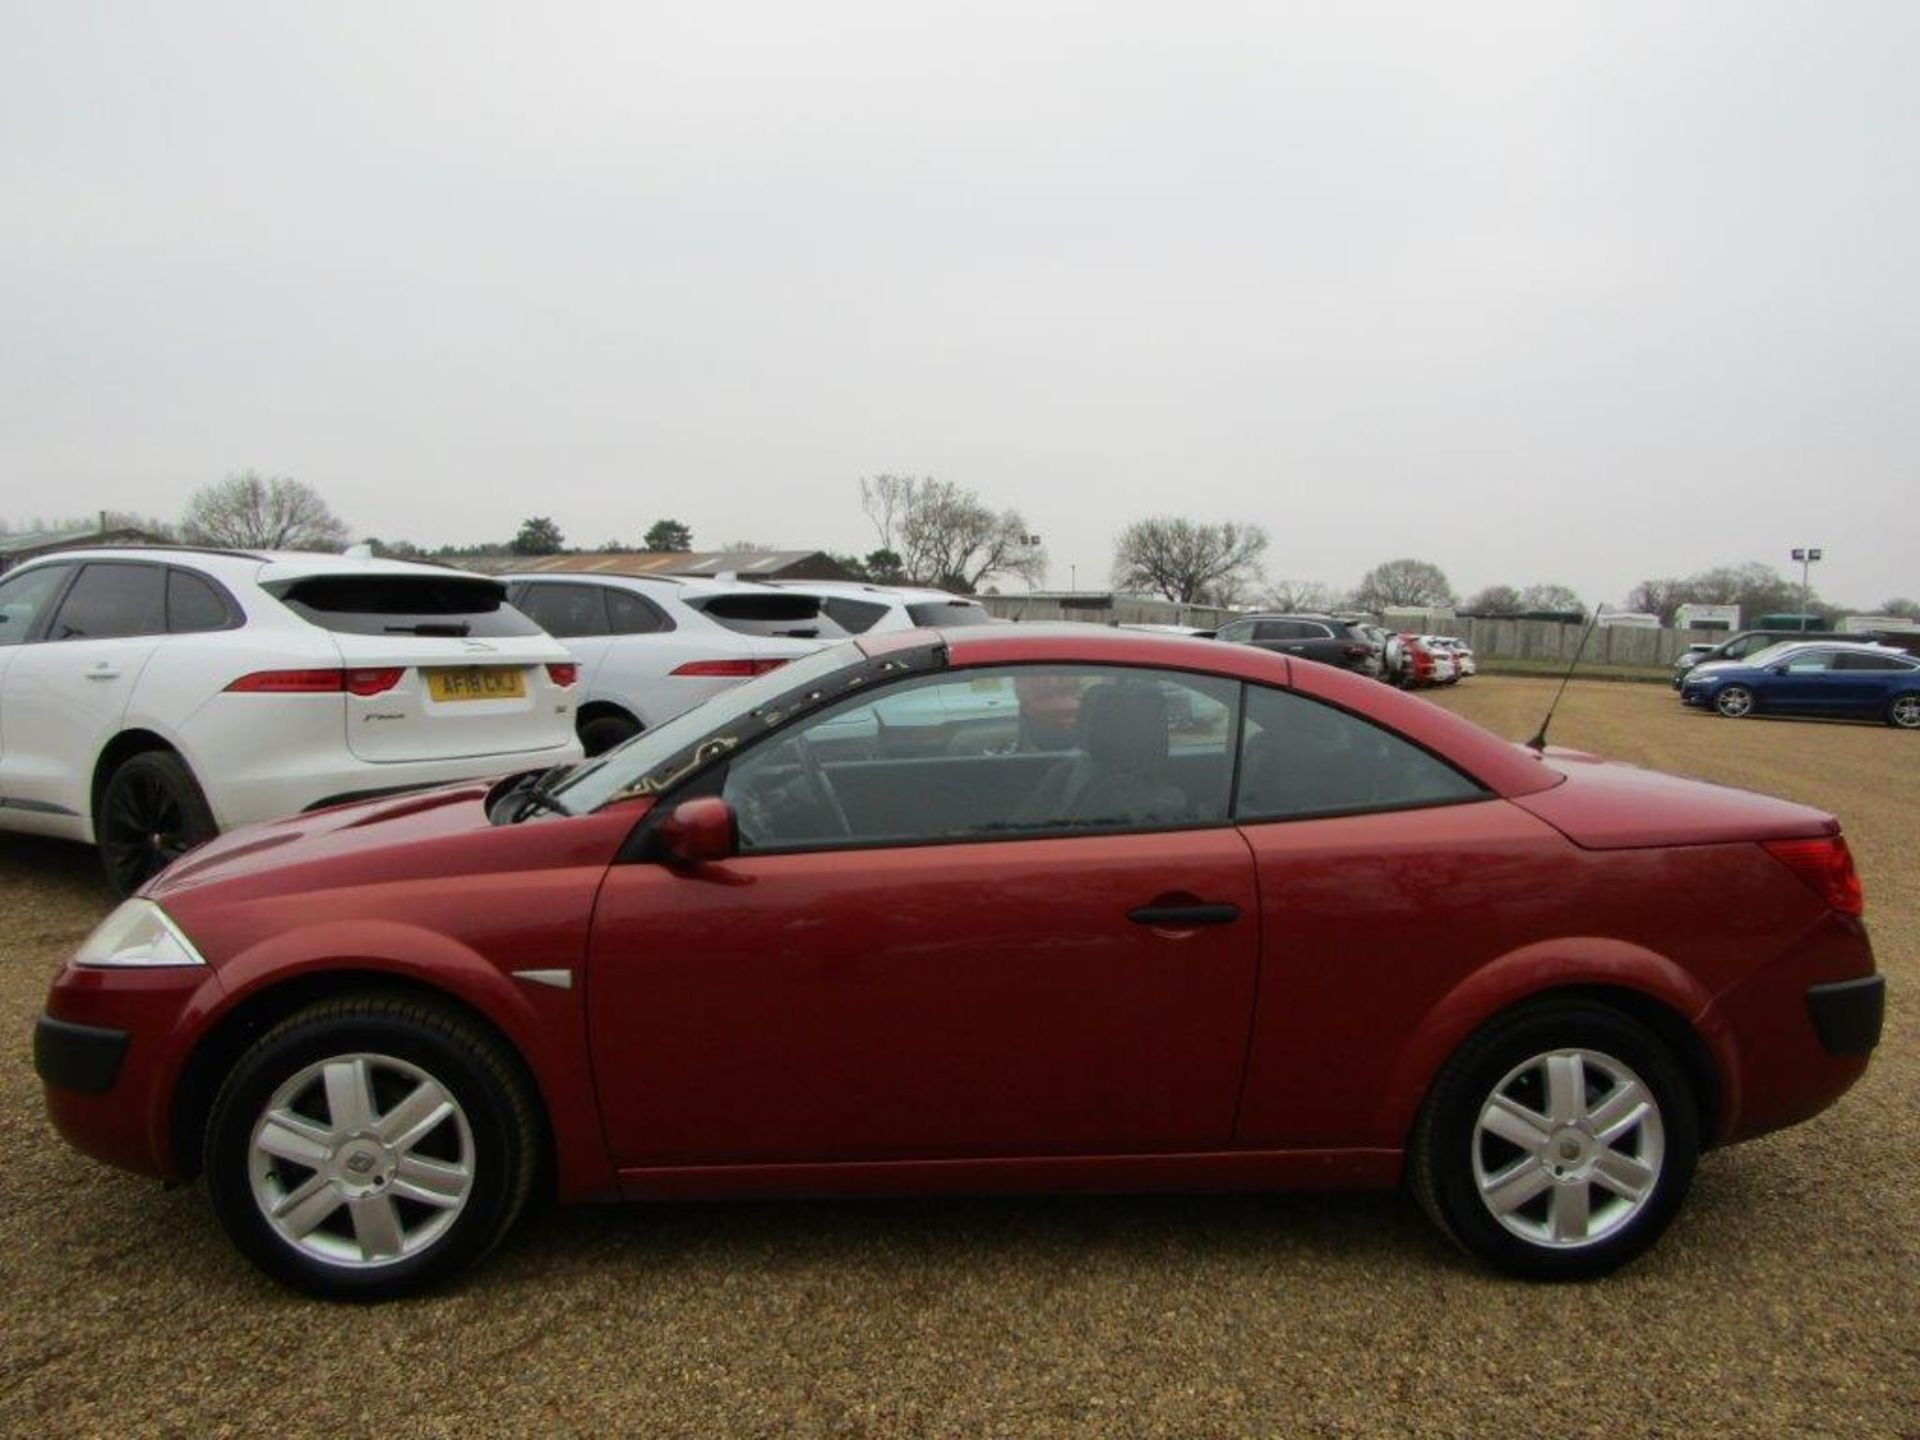 55 05 Renault Megane Coupe - Image 3 of 18